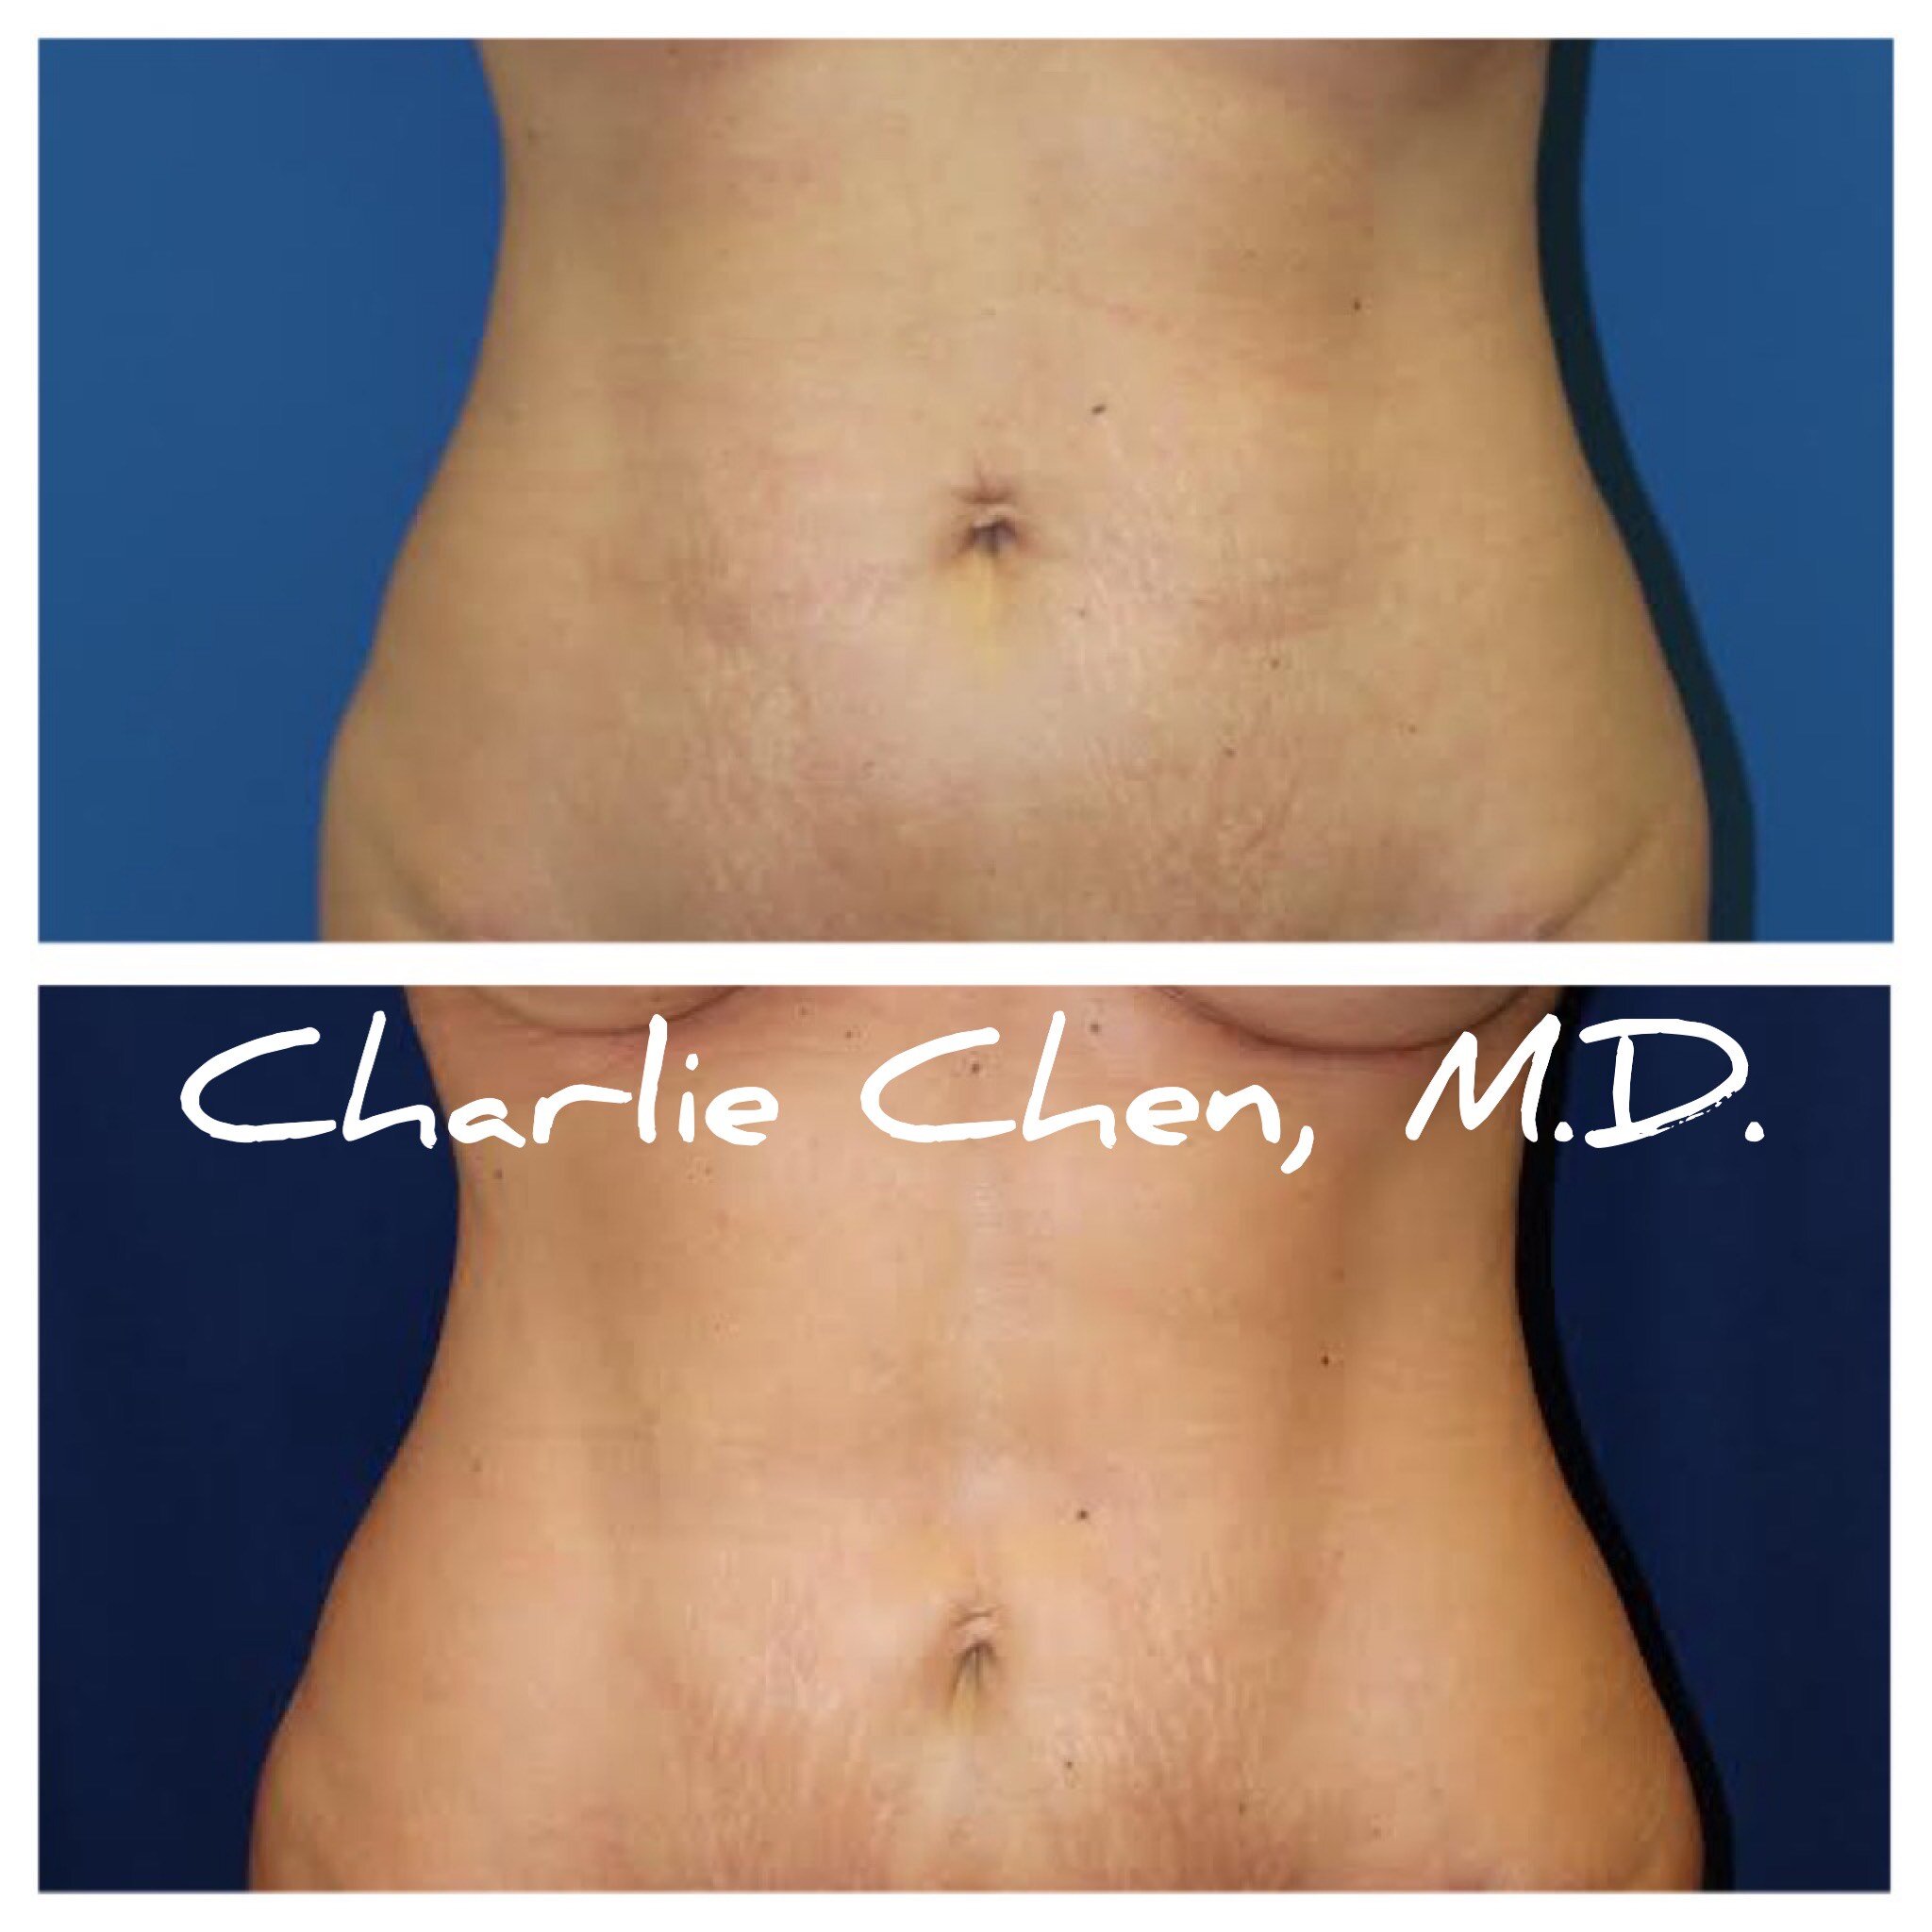 Abdominal Etching Before and After Photos, San Diego, CA - Charlie Chen, MD  Plastic & Reconstructive Surgery